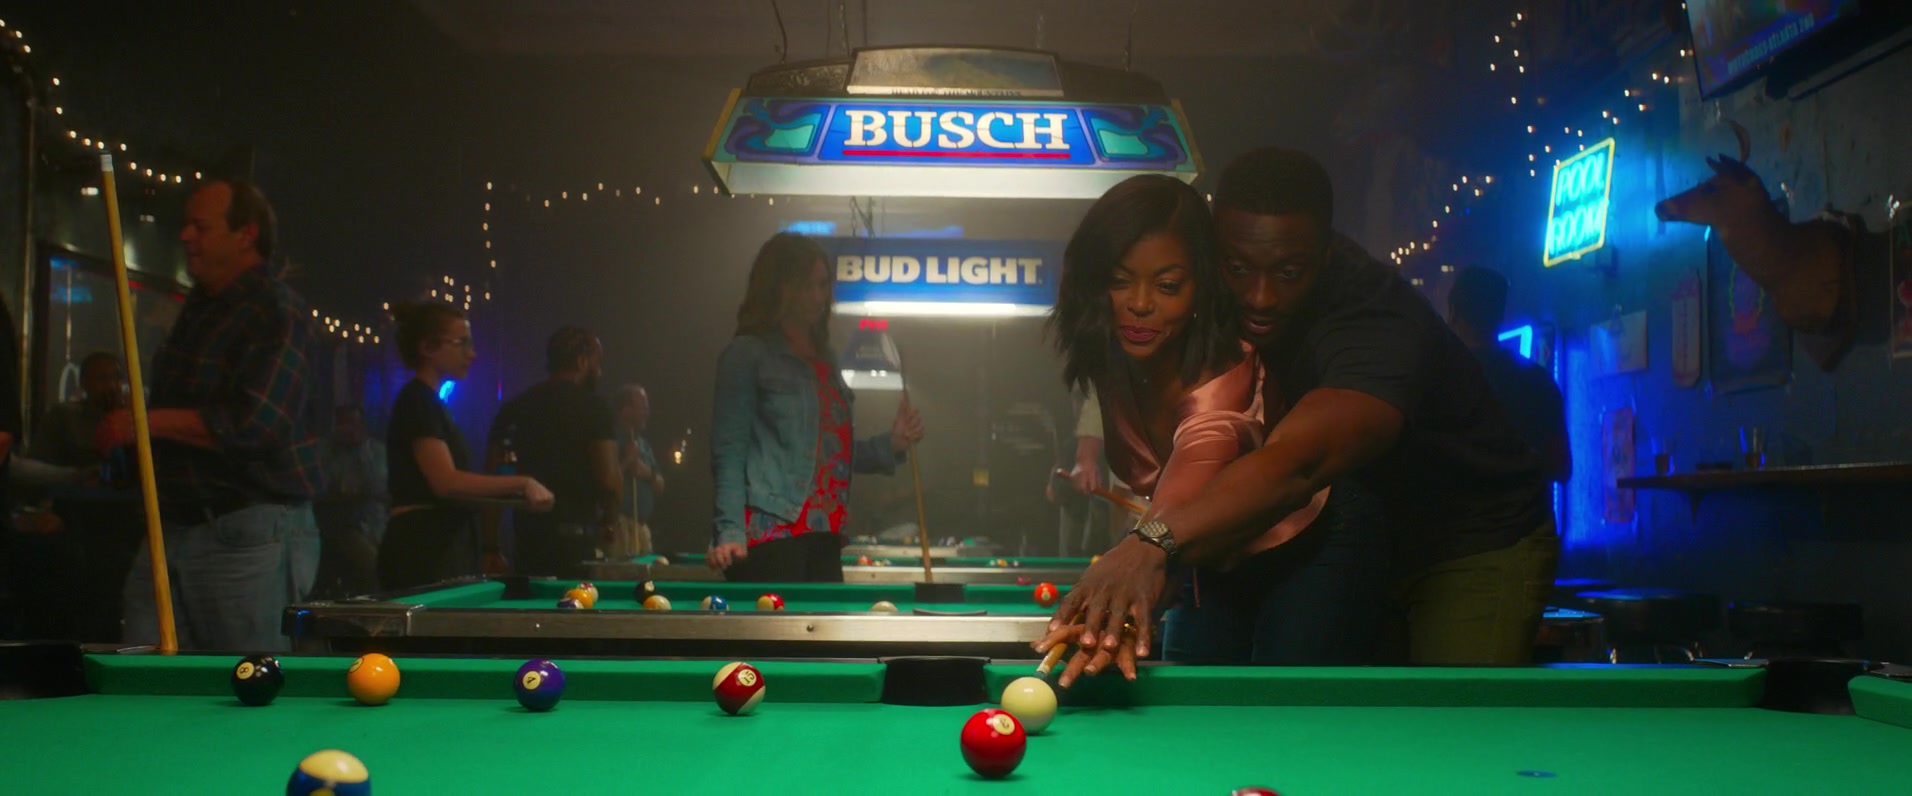 Busch Beer And Bud Light Pool Table, Busch Light Pool Table Lights